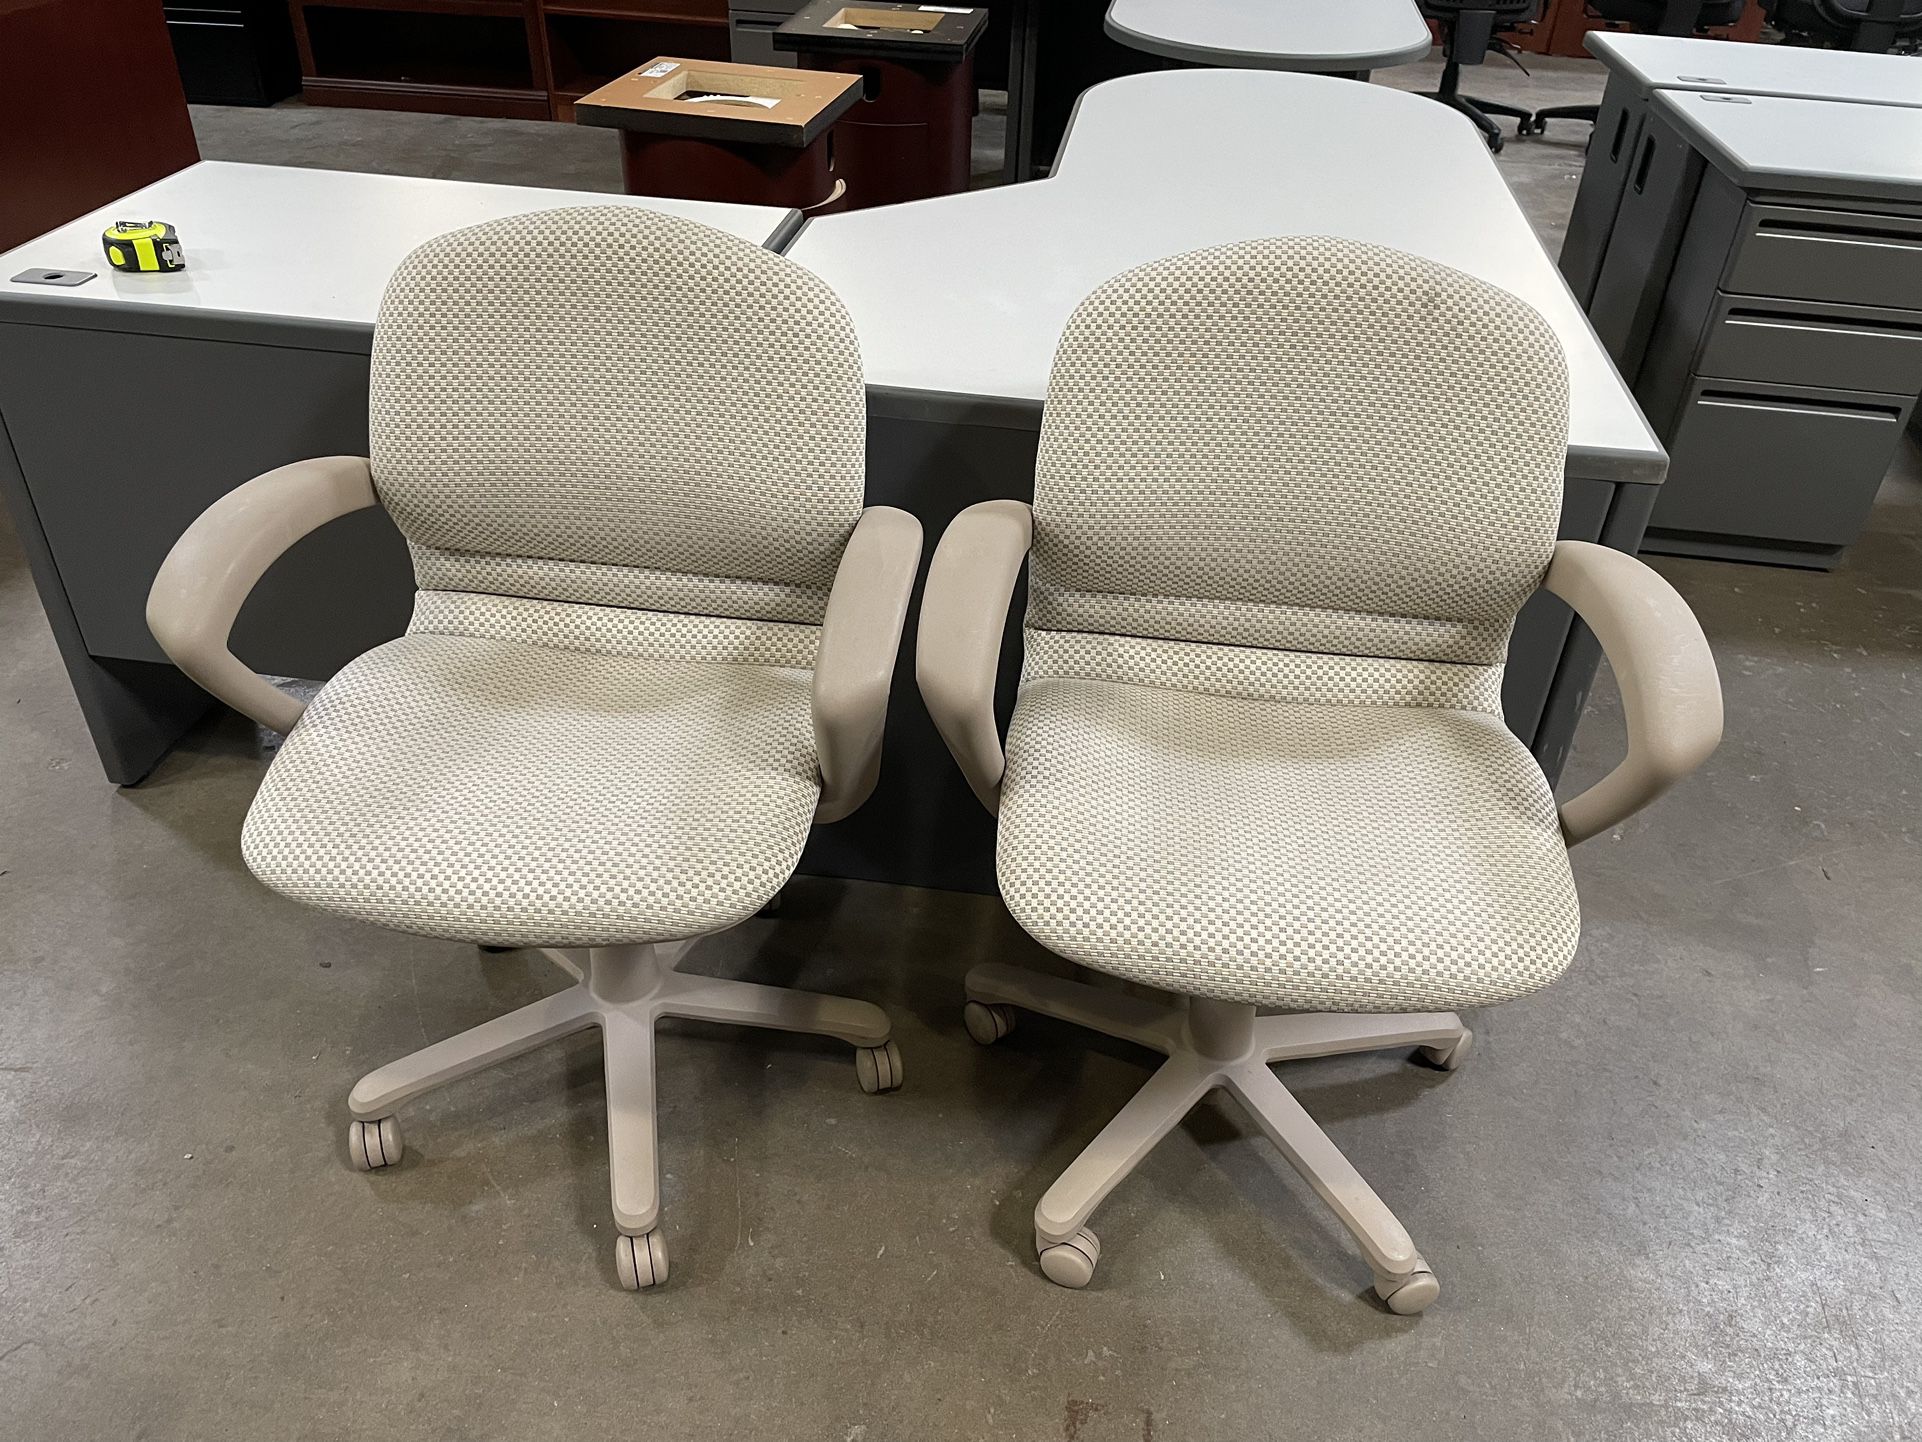 3 Matching Steelcase Office Rolling Computer Chairs! Only $40 Ea!